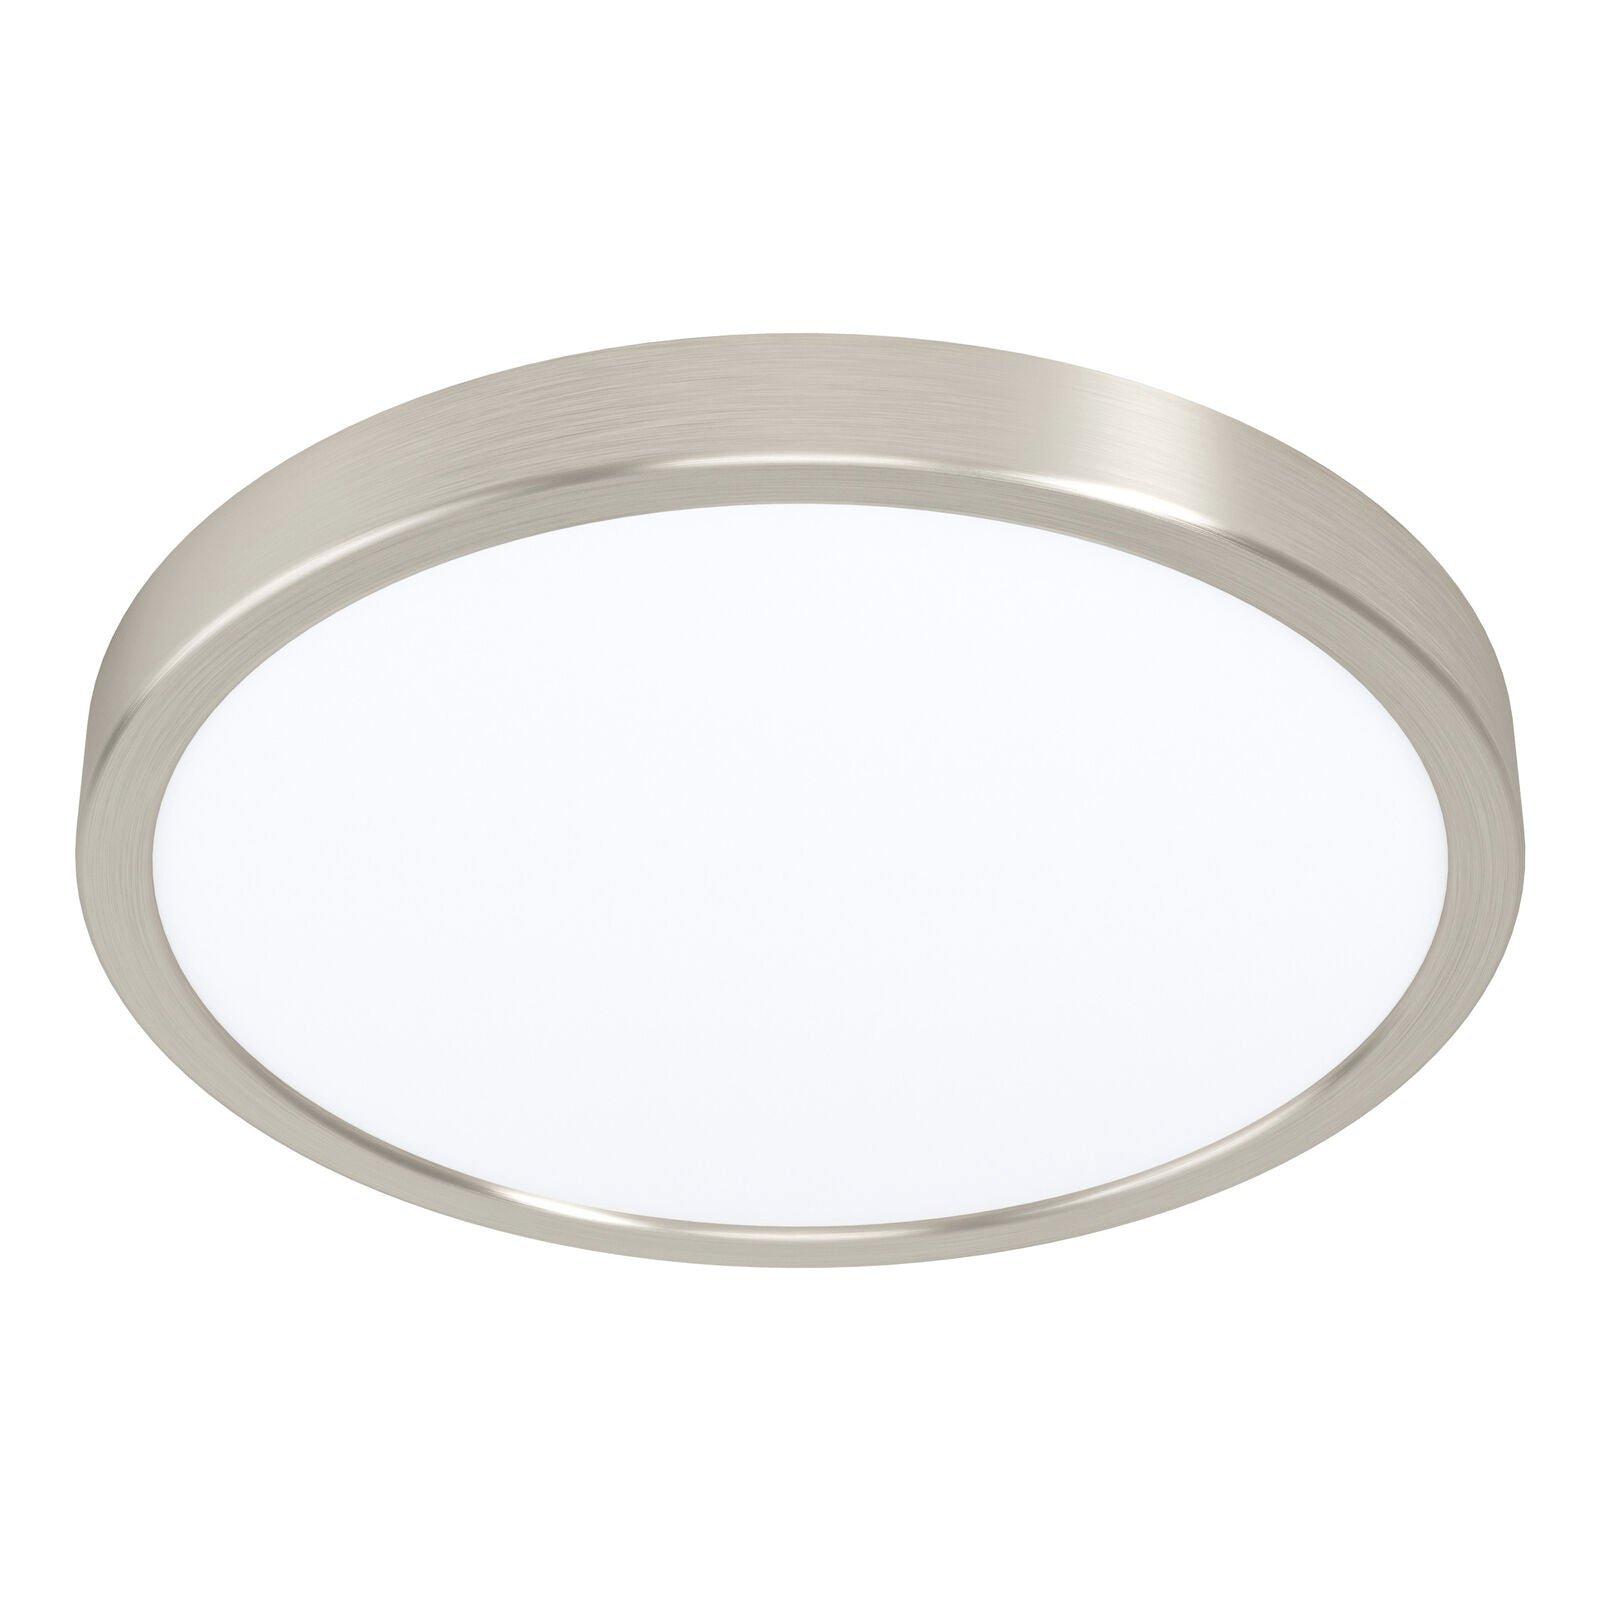 Wall / Ceiling Light Satin Nickel 285mm Round Surface Mounted 20W LED 4000K